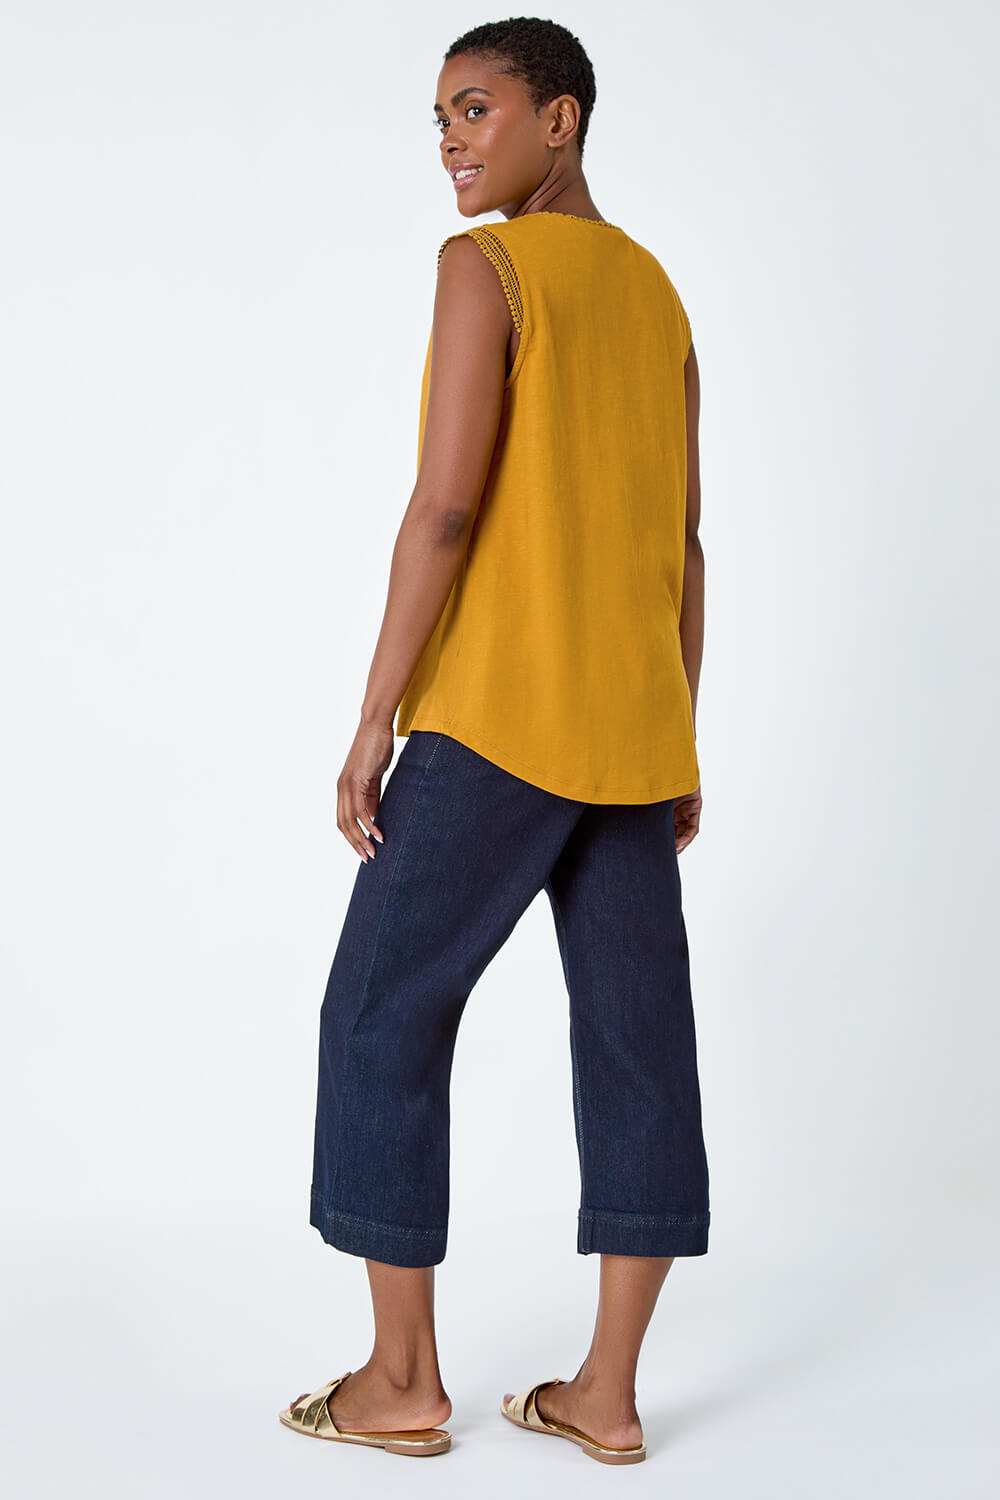 Ochre Sleeveless Lace Trim Cotton Top, Image 3 of 5